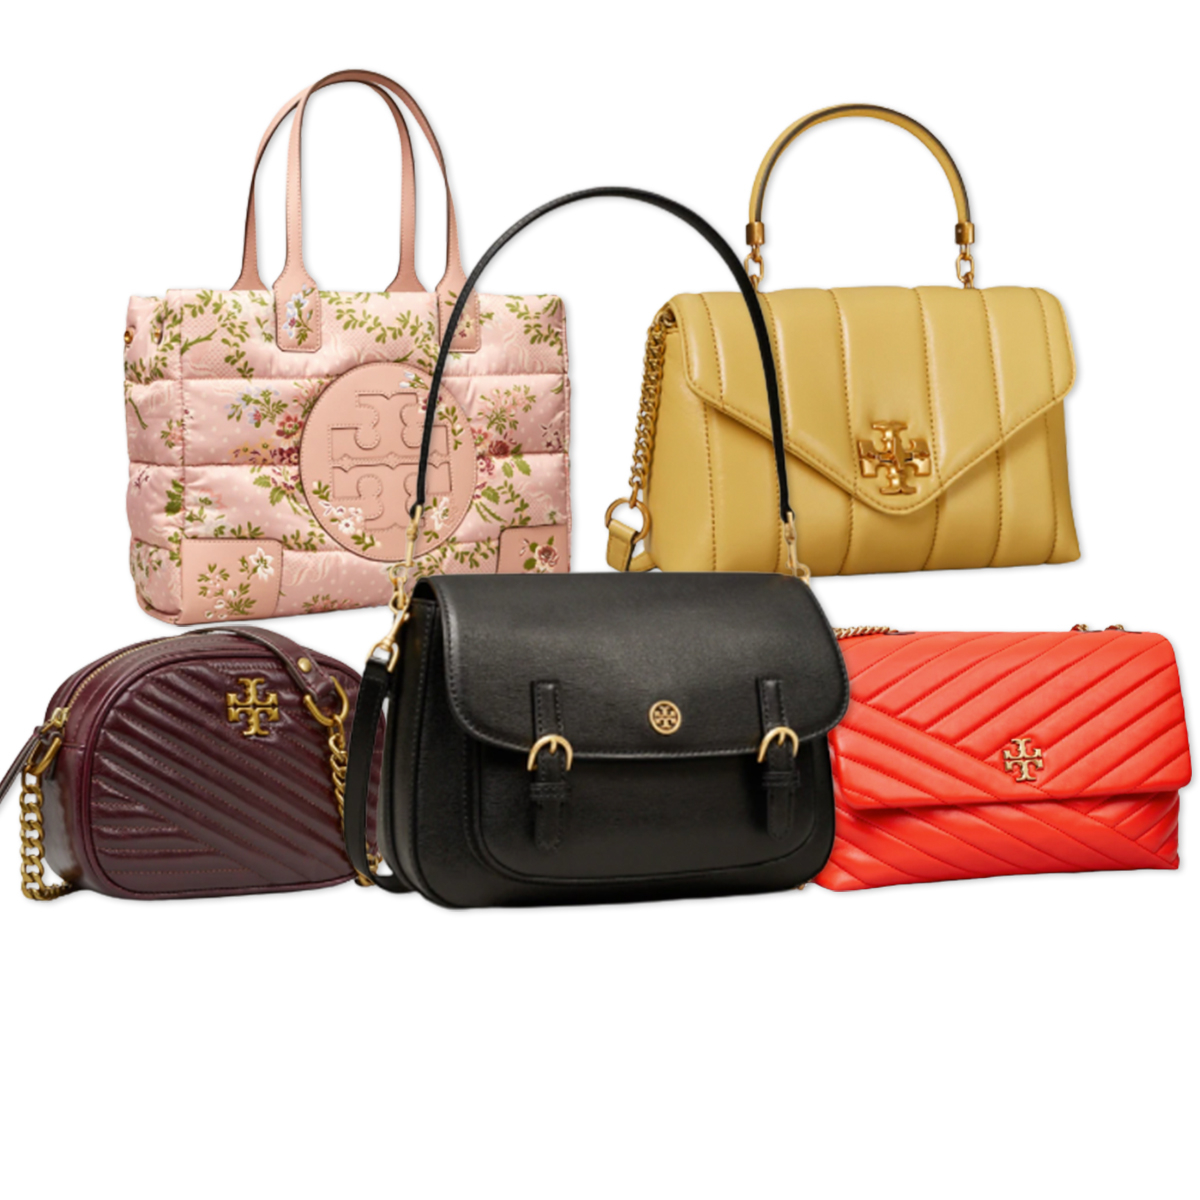 5 On-Sale Tory Burch Bags to Shop Right Now